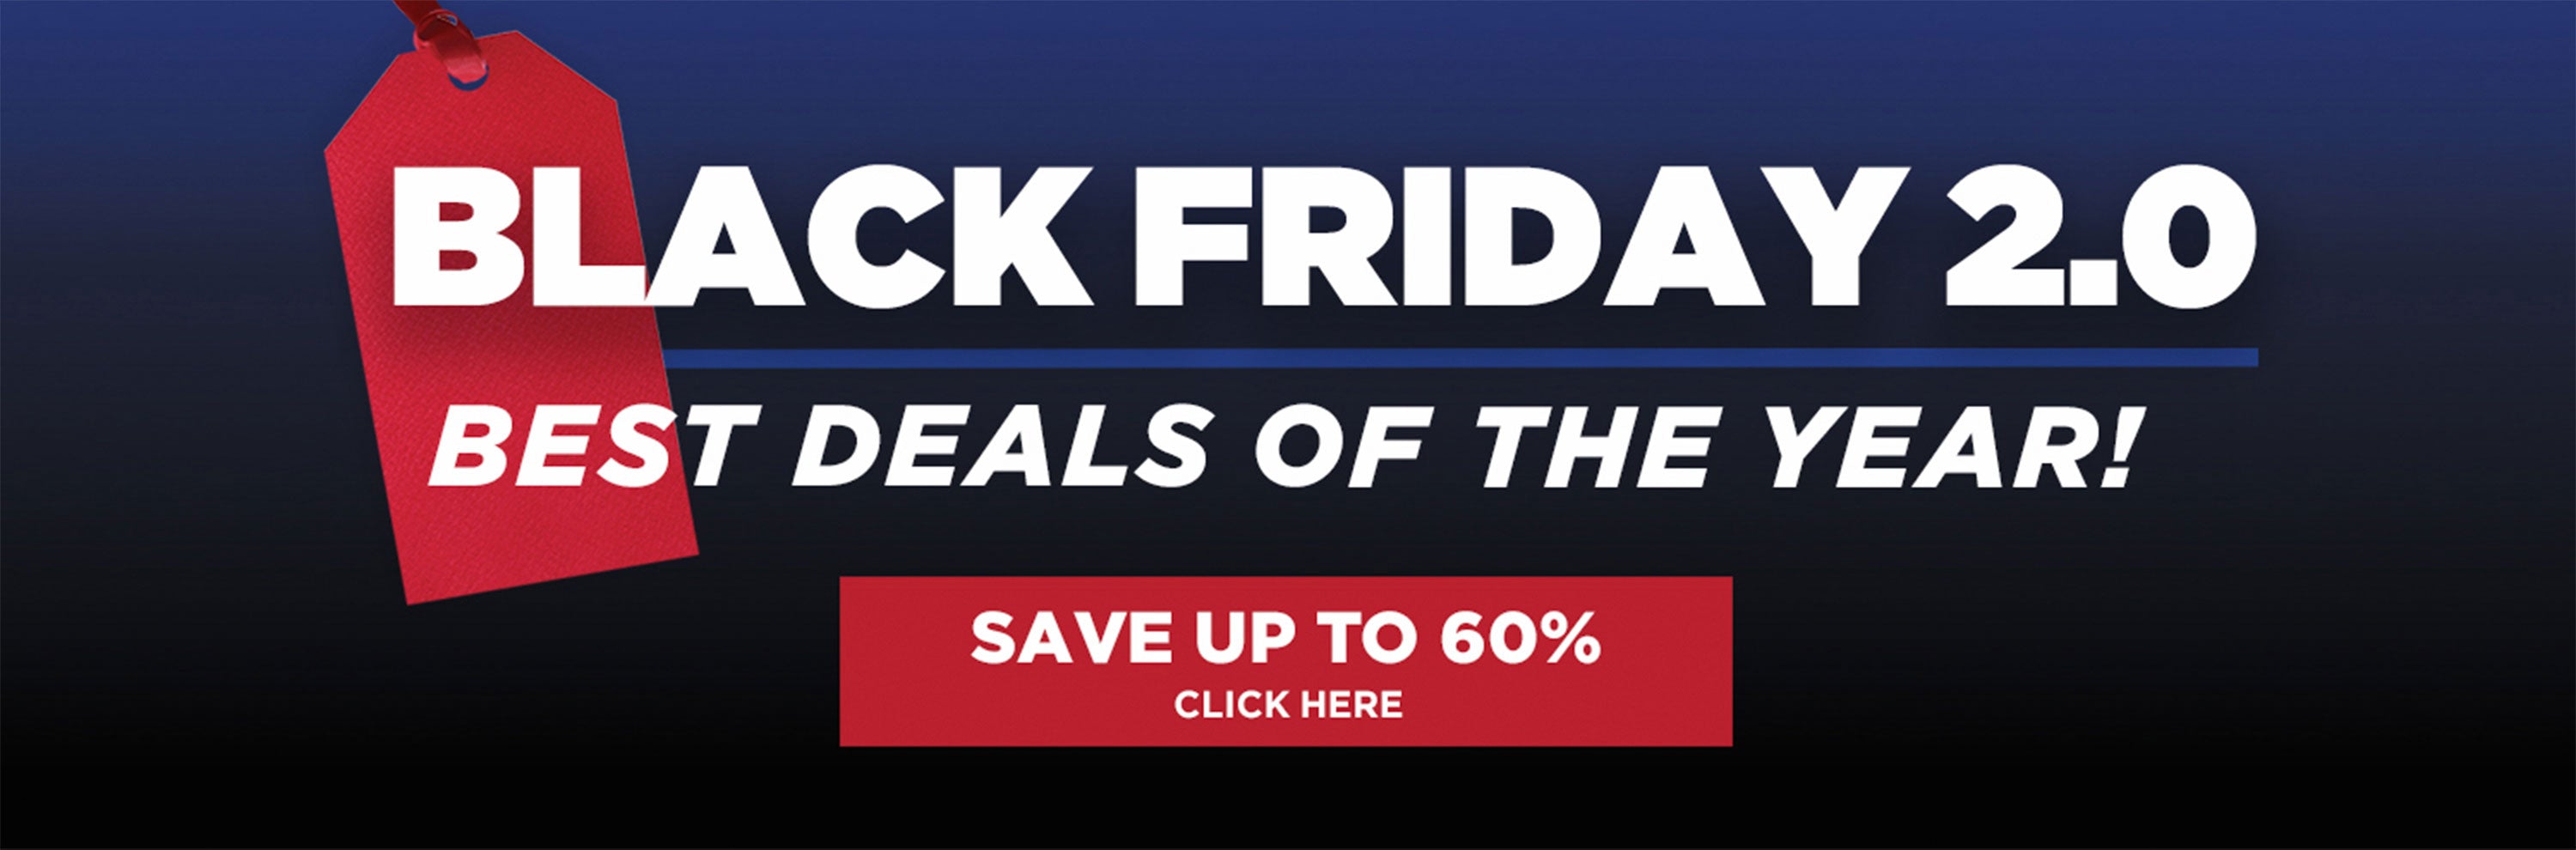 Bass Pro Shops Black Friday Ad Offers Fishing Hunting Deals, 56% OFF